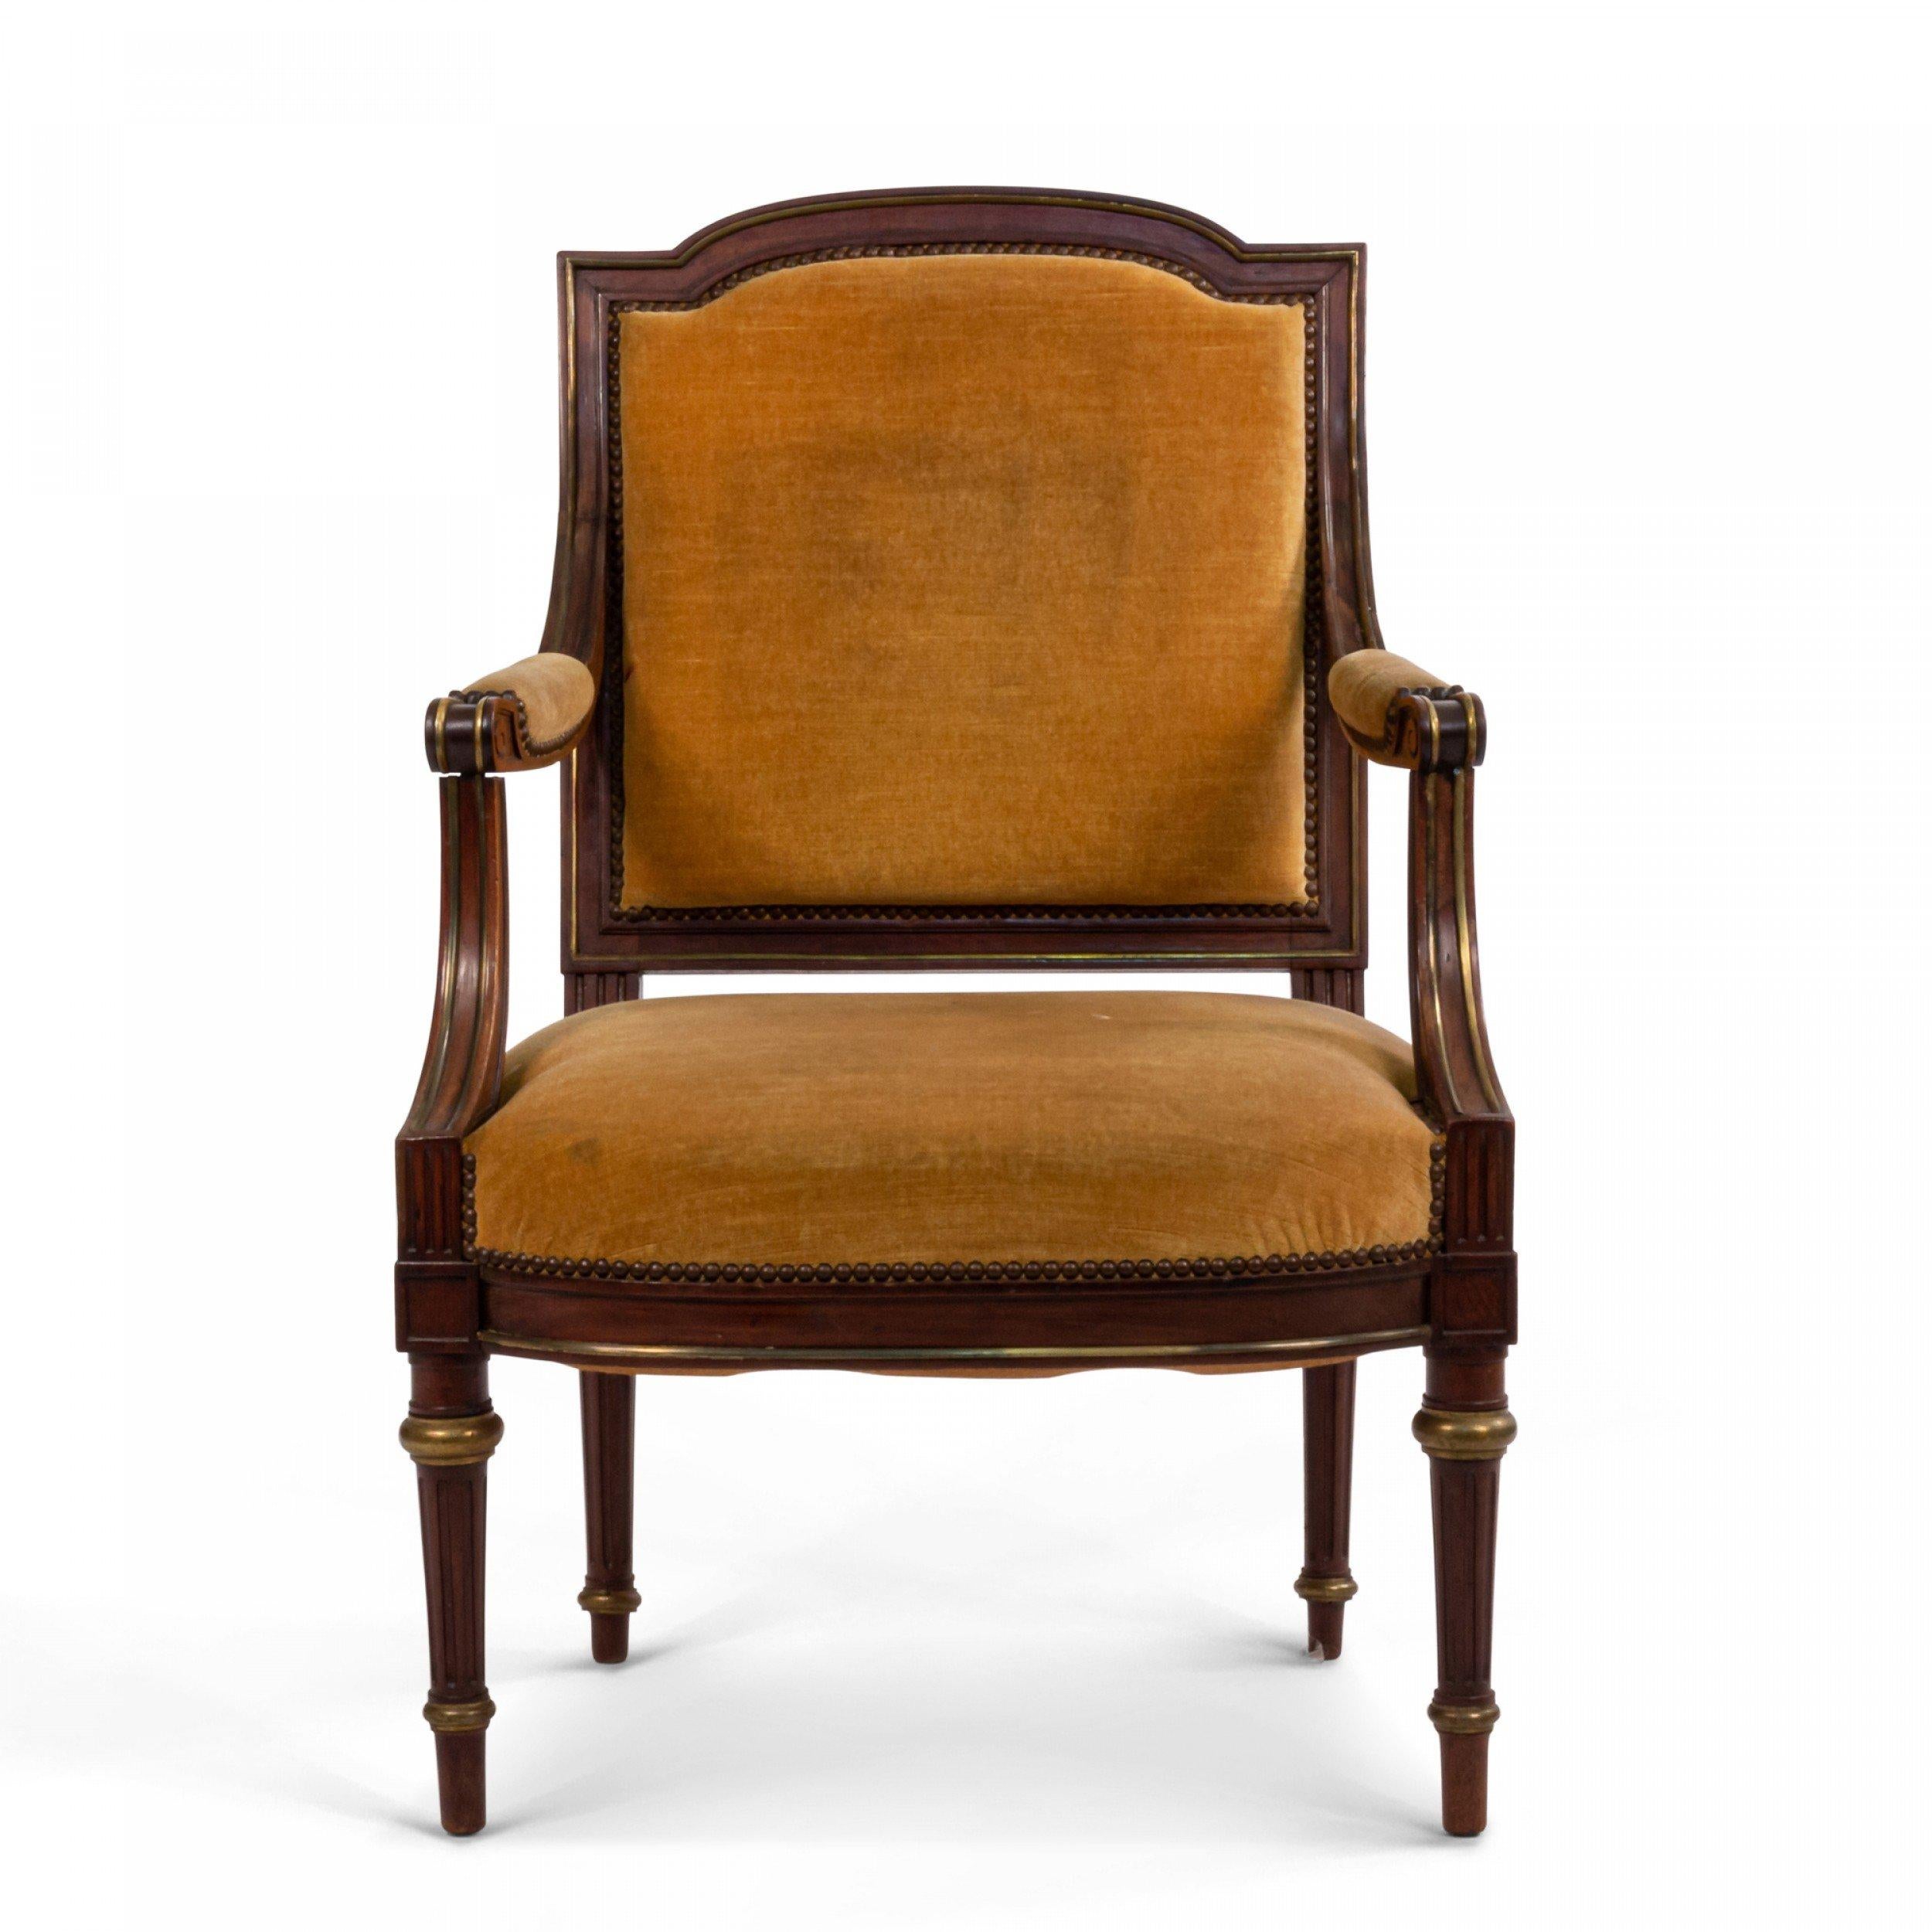 French Louis XVI style walnut arm chair with mustard yellow velvet upholstered back, seat, and armrests with brass trim detail.
       